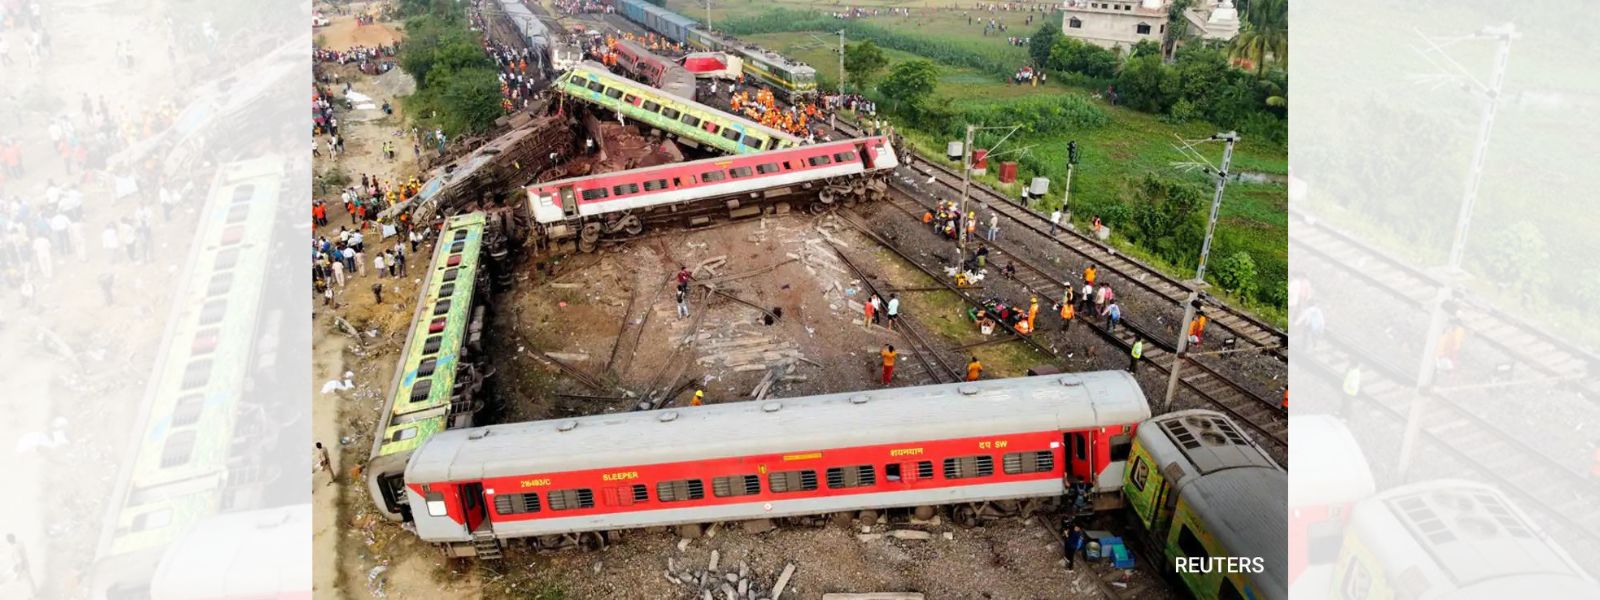 Odisha Train Disaster: Death toll reaches 238 with 900 injured